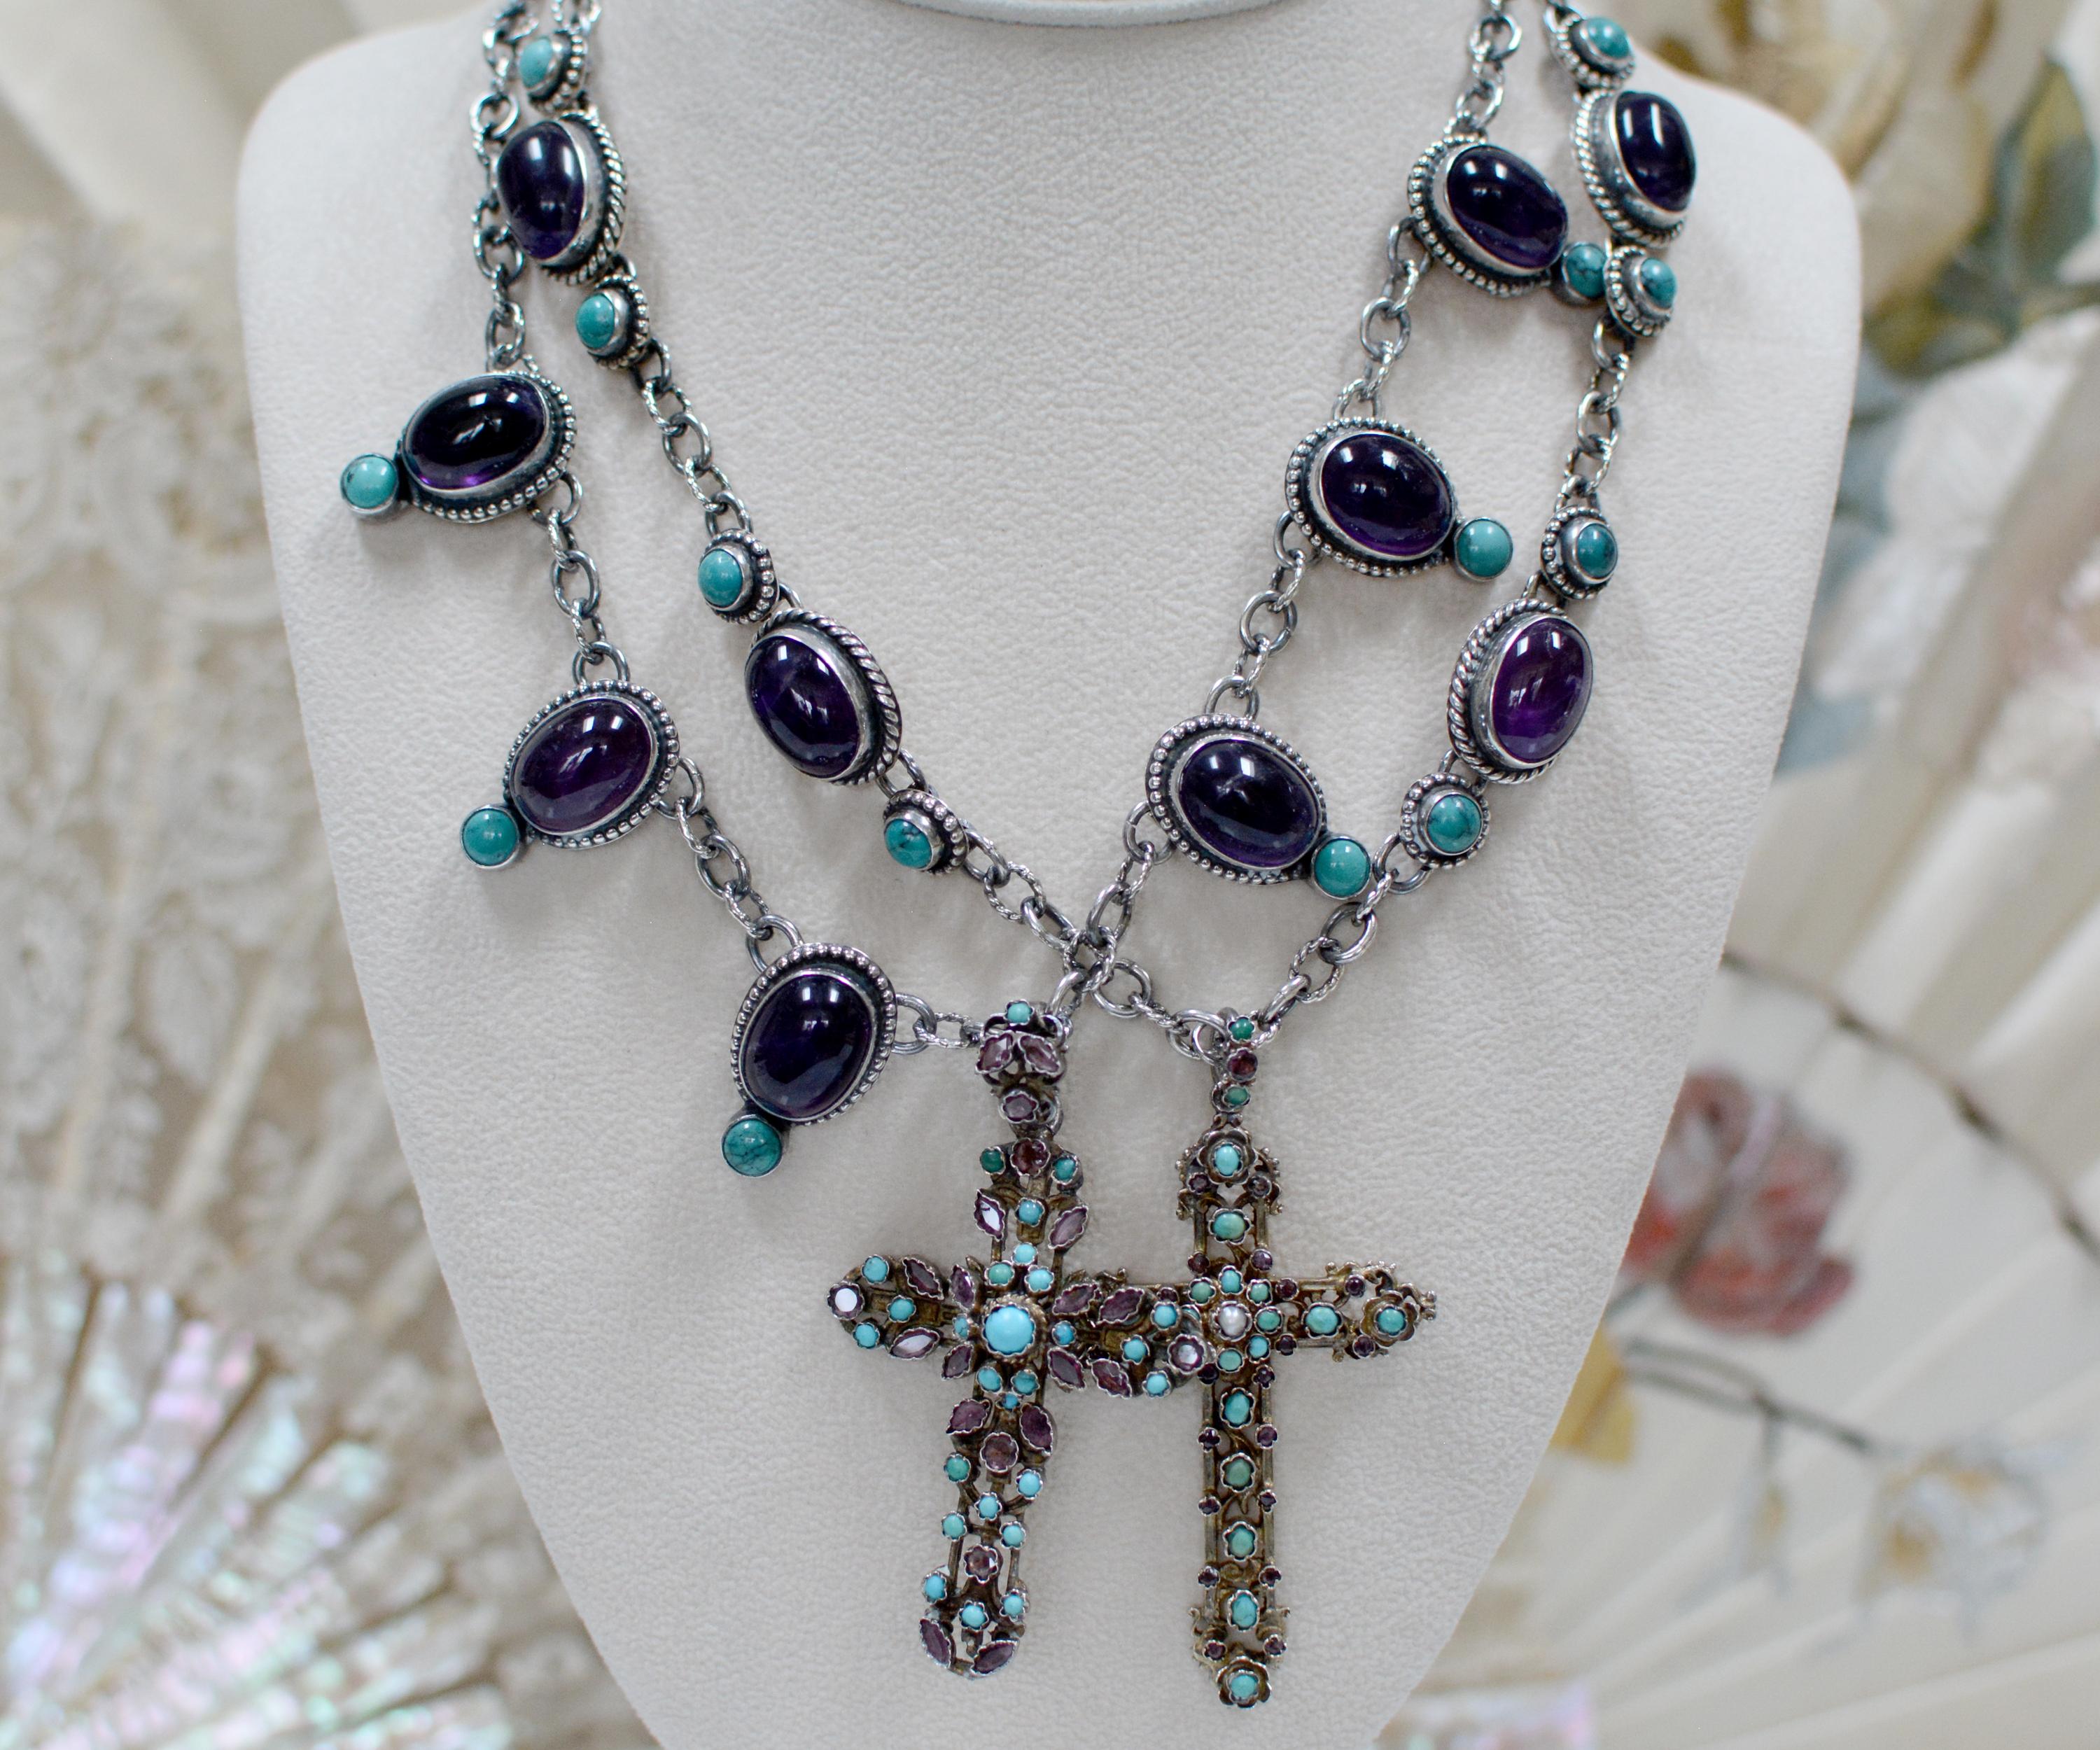 Women's or Men's Jill Garber Antique Austro Hungarian Cross Necklace with Turquoise and Amethyst For Sale